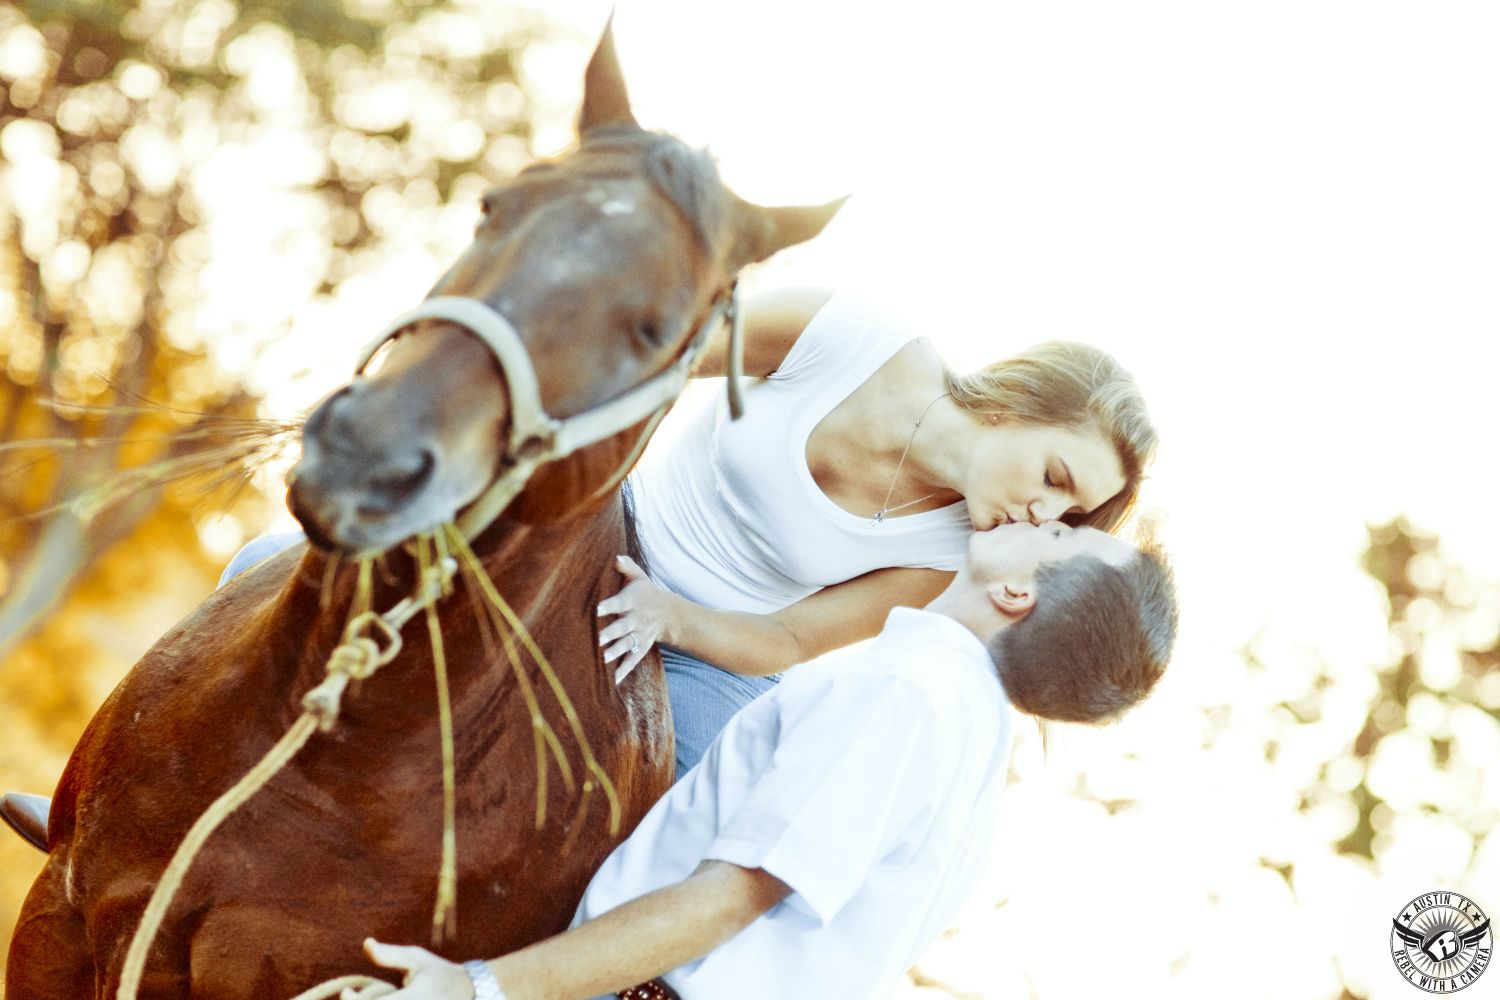 blond girl in white tank top and blue jeans riding on horde leans over and kisses guy in white short sleeve button up shirt with blurred trees in background in this engagement photo in south texas